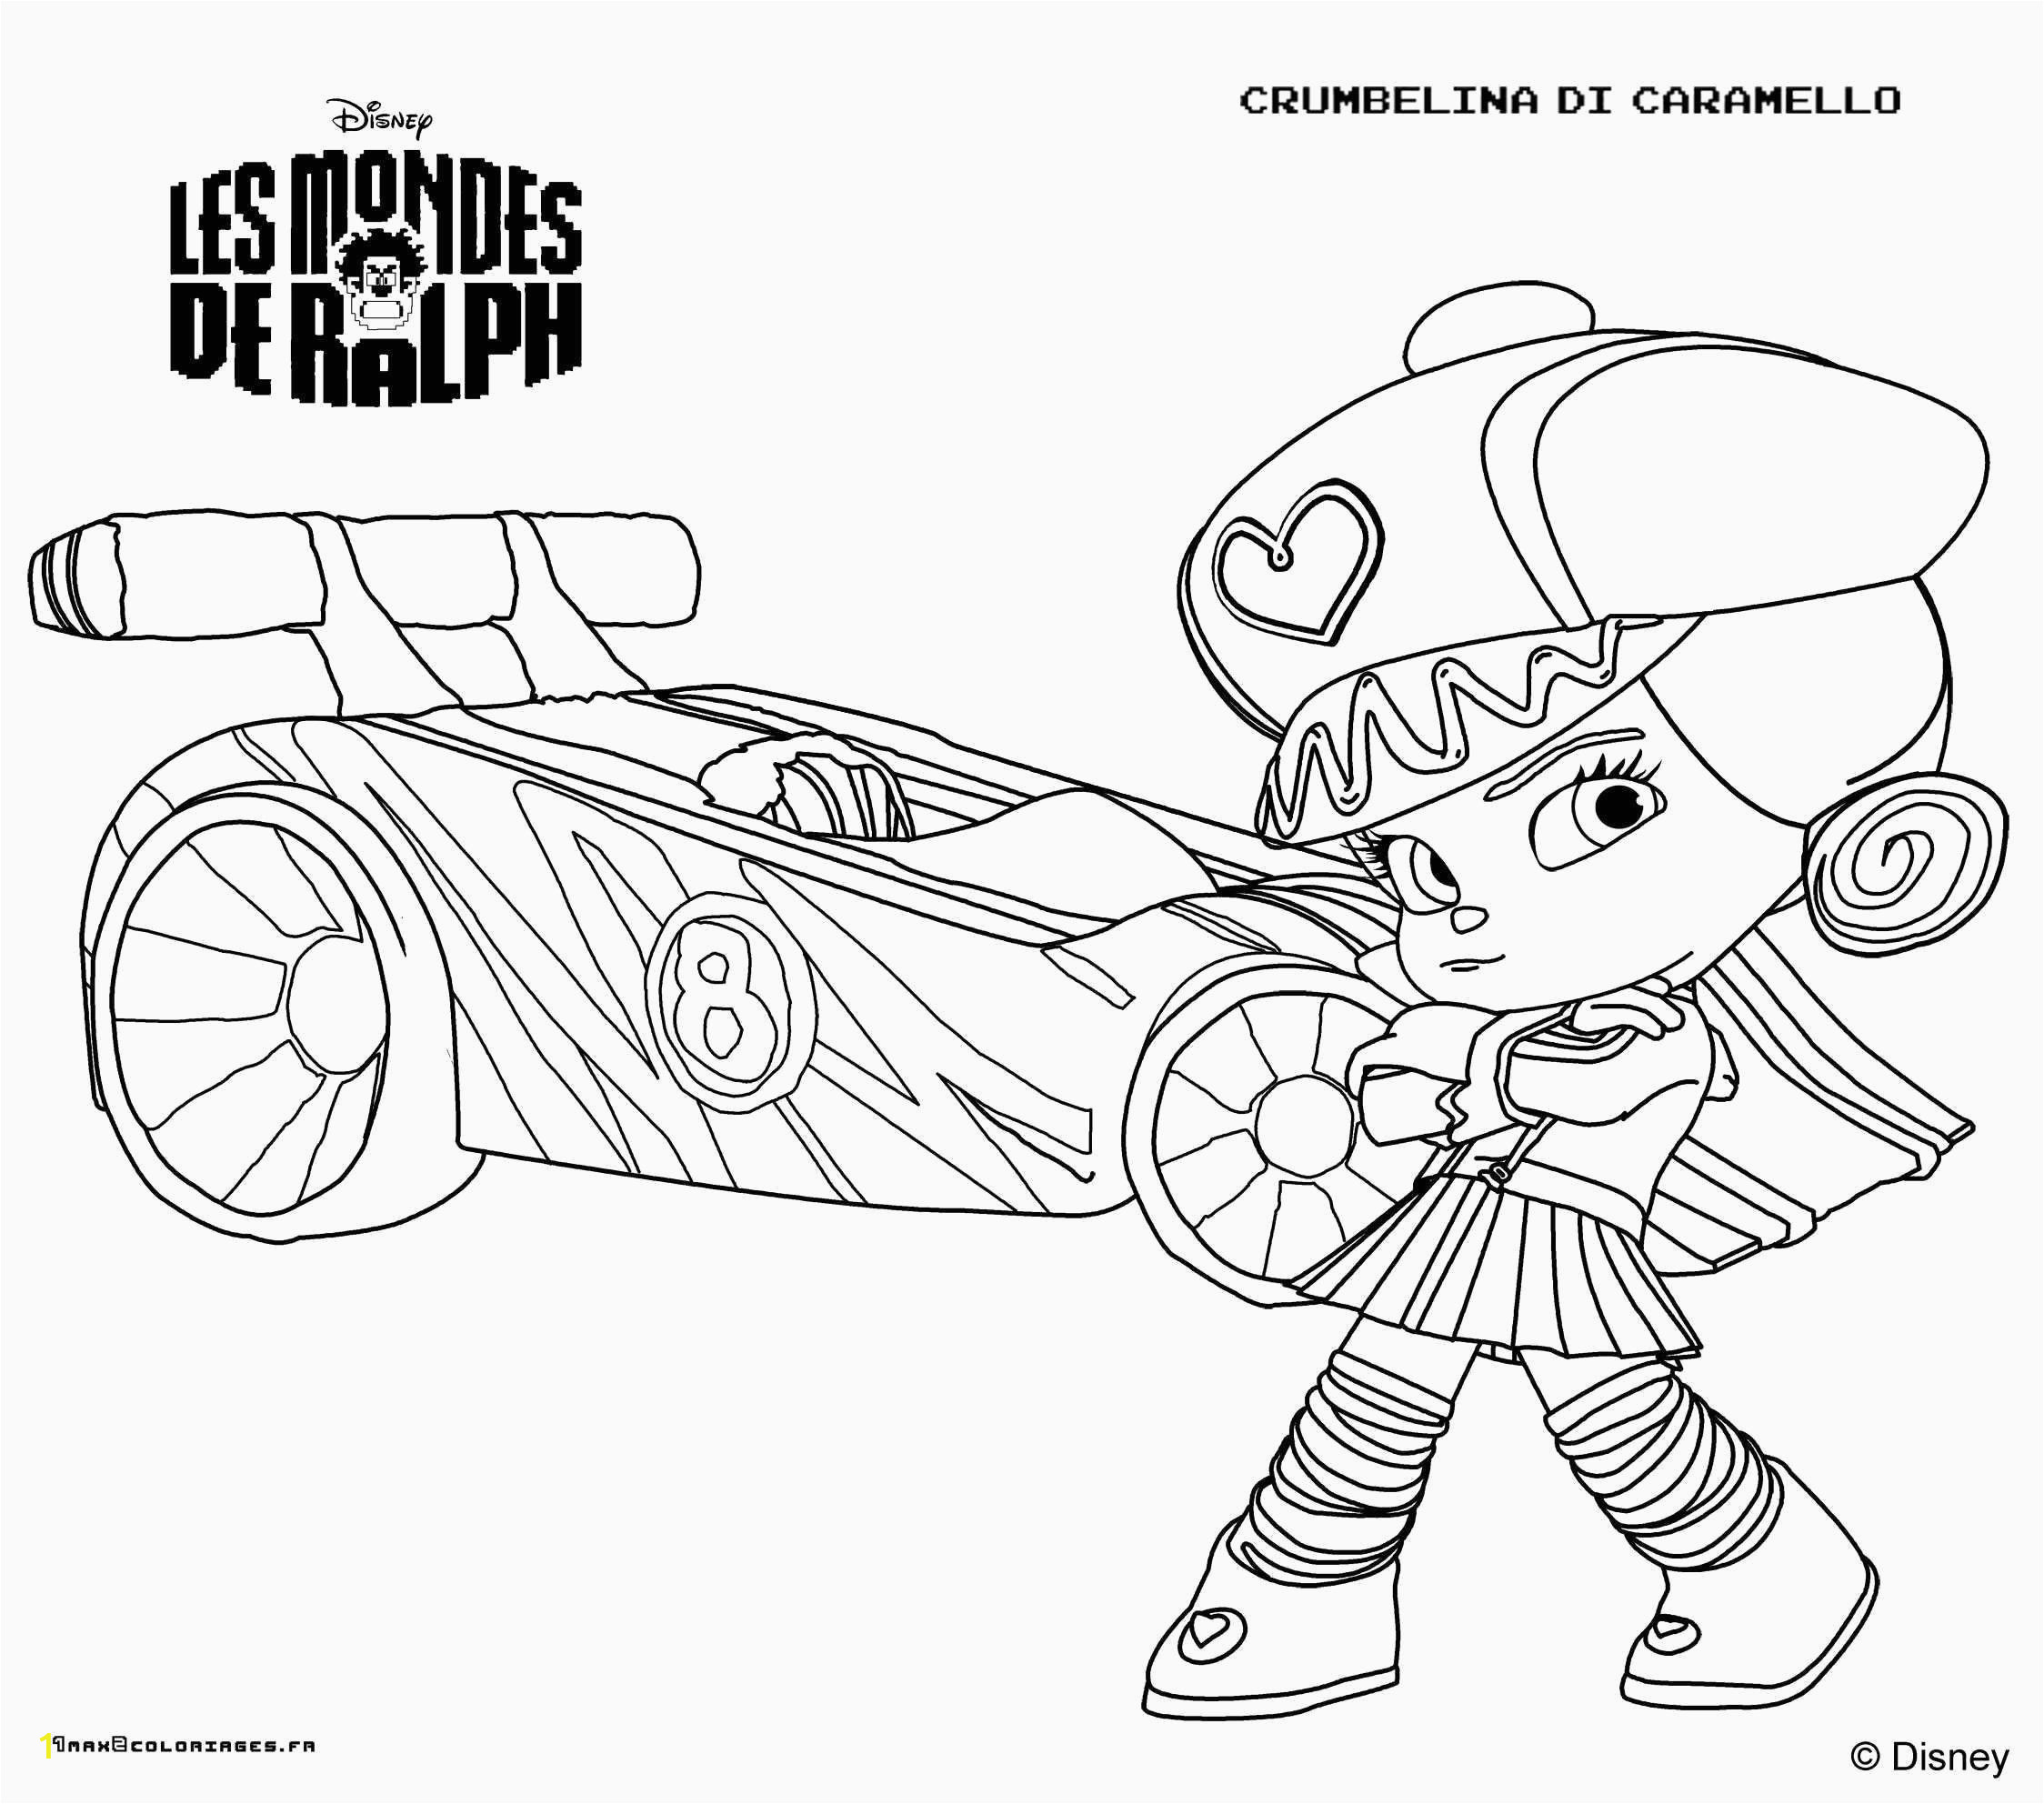 Disney Princess Halloween Coloring Pages Pin On Popular Cartoon Coloring Pages